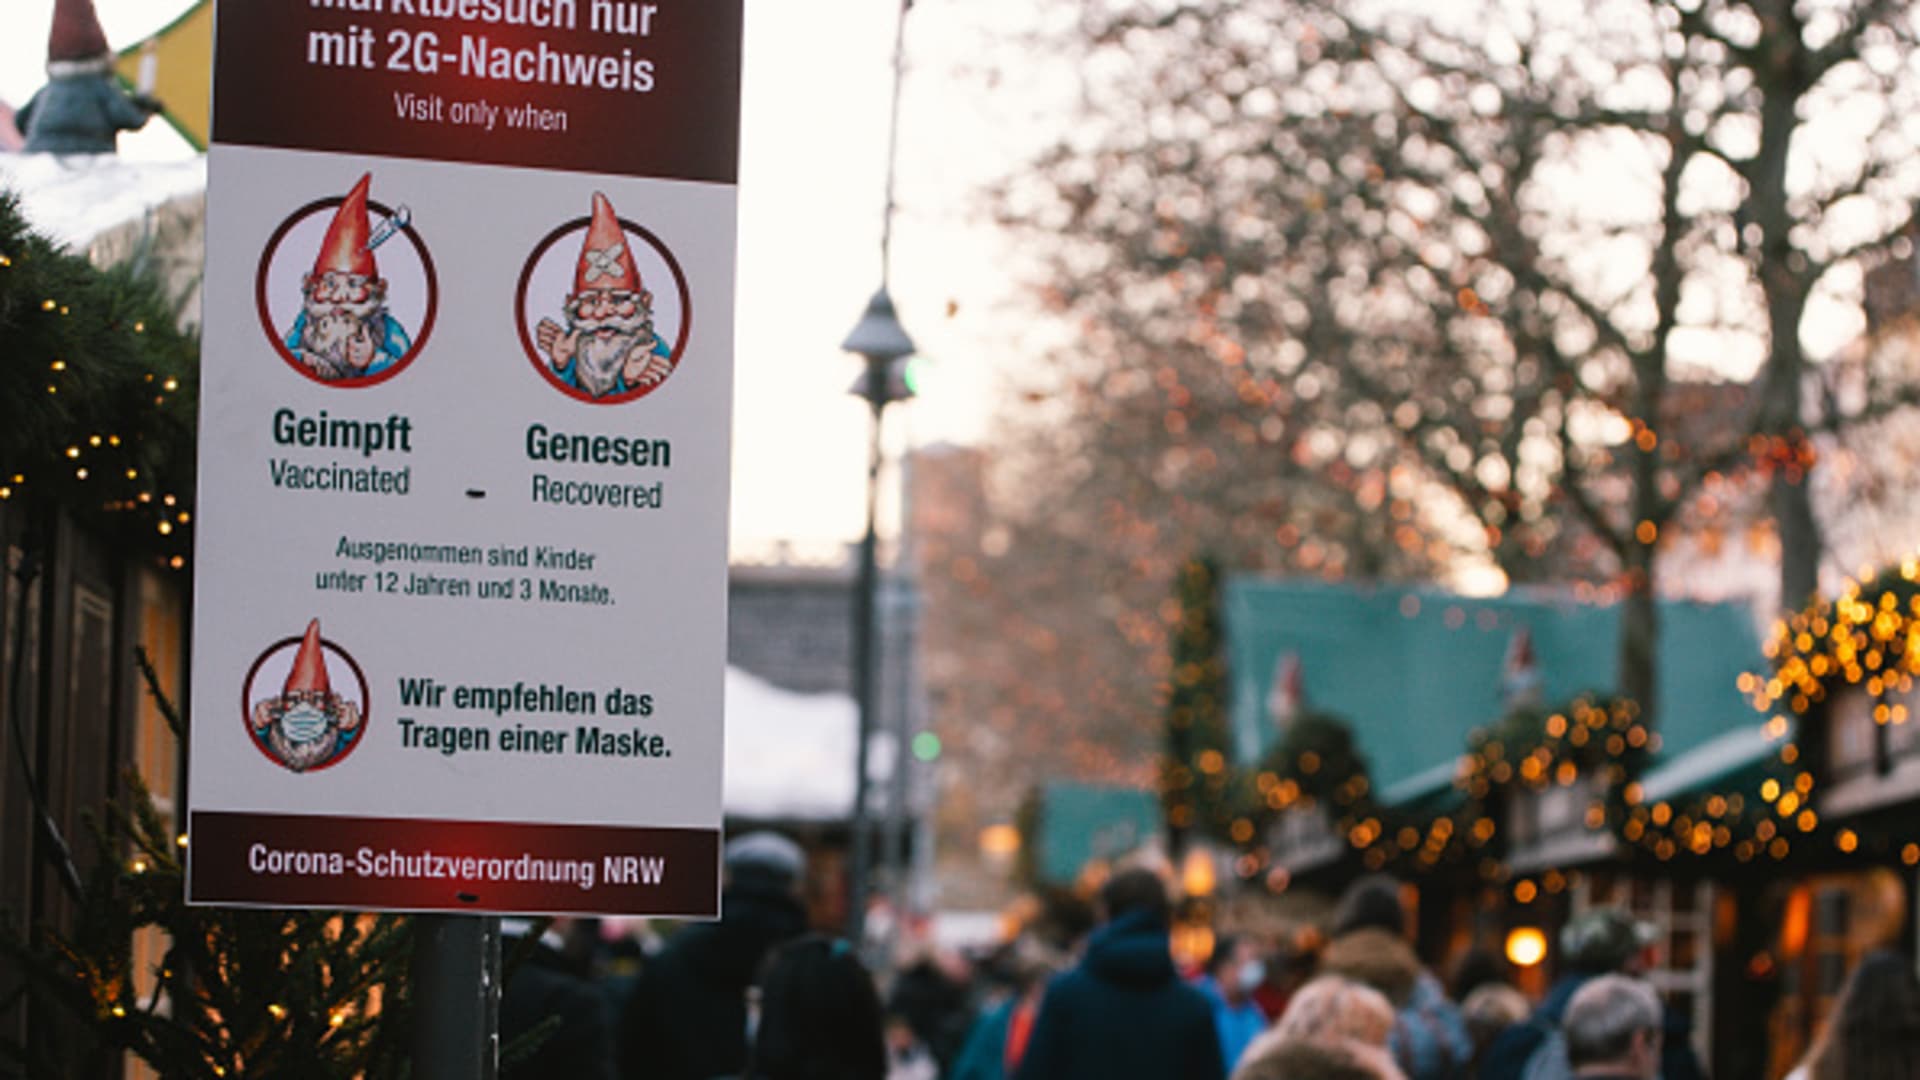 2G sign is seen during the opening of Christmas market in Cologne, Germany on Nov 22, 2021 as Coronavirus cases are at a high peak in Germany.